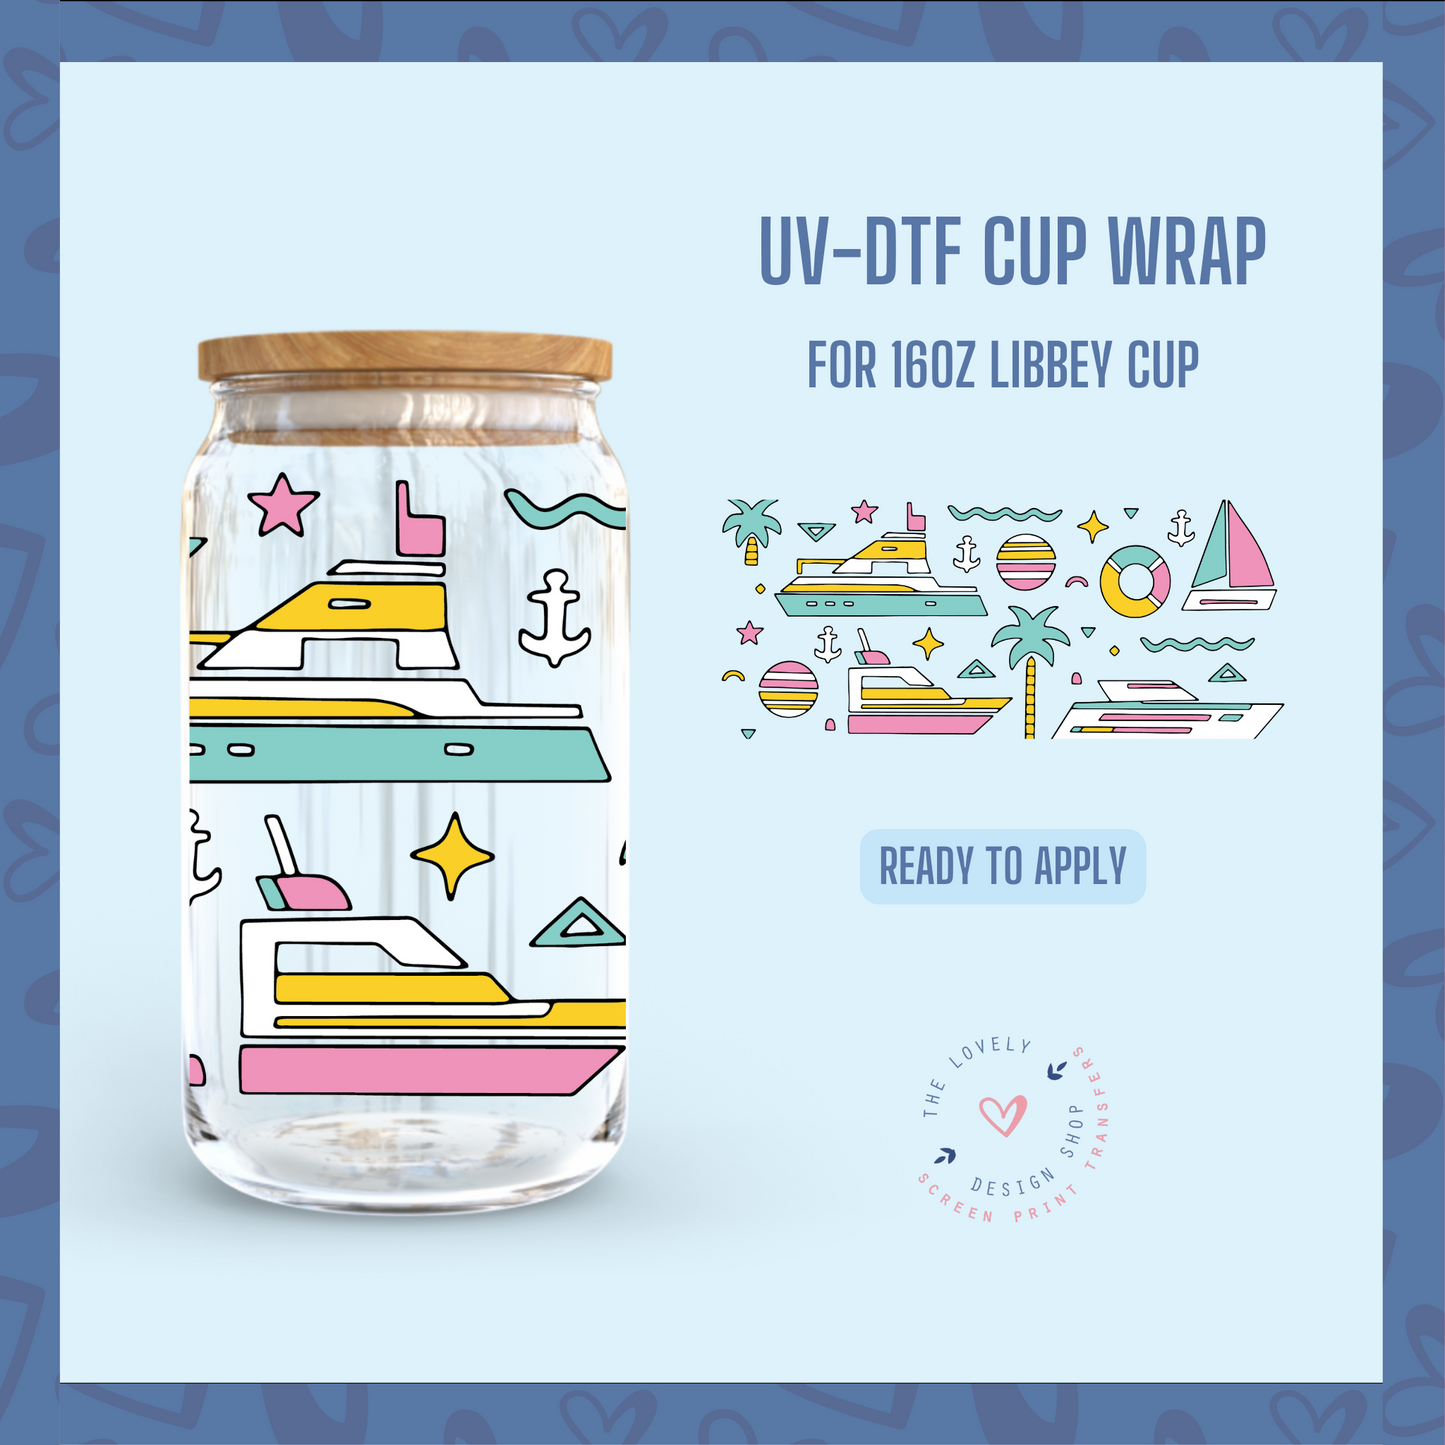 Yachty - UV DTF 16 oz Libbey Cup Wrap (Ready to Ship) May 13